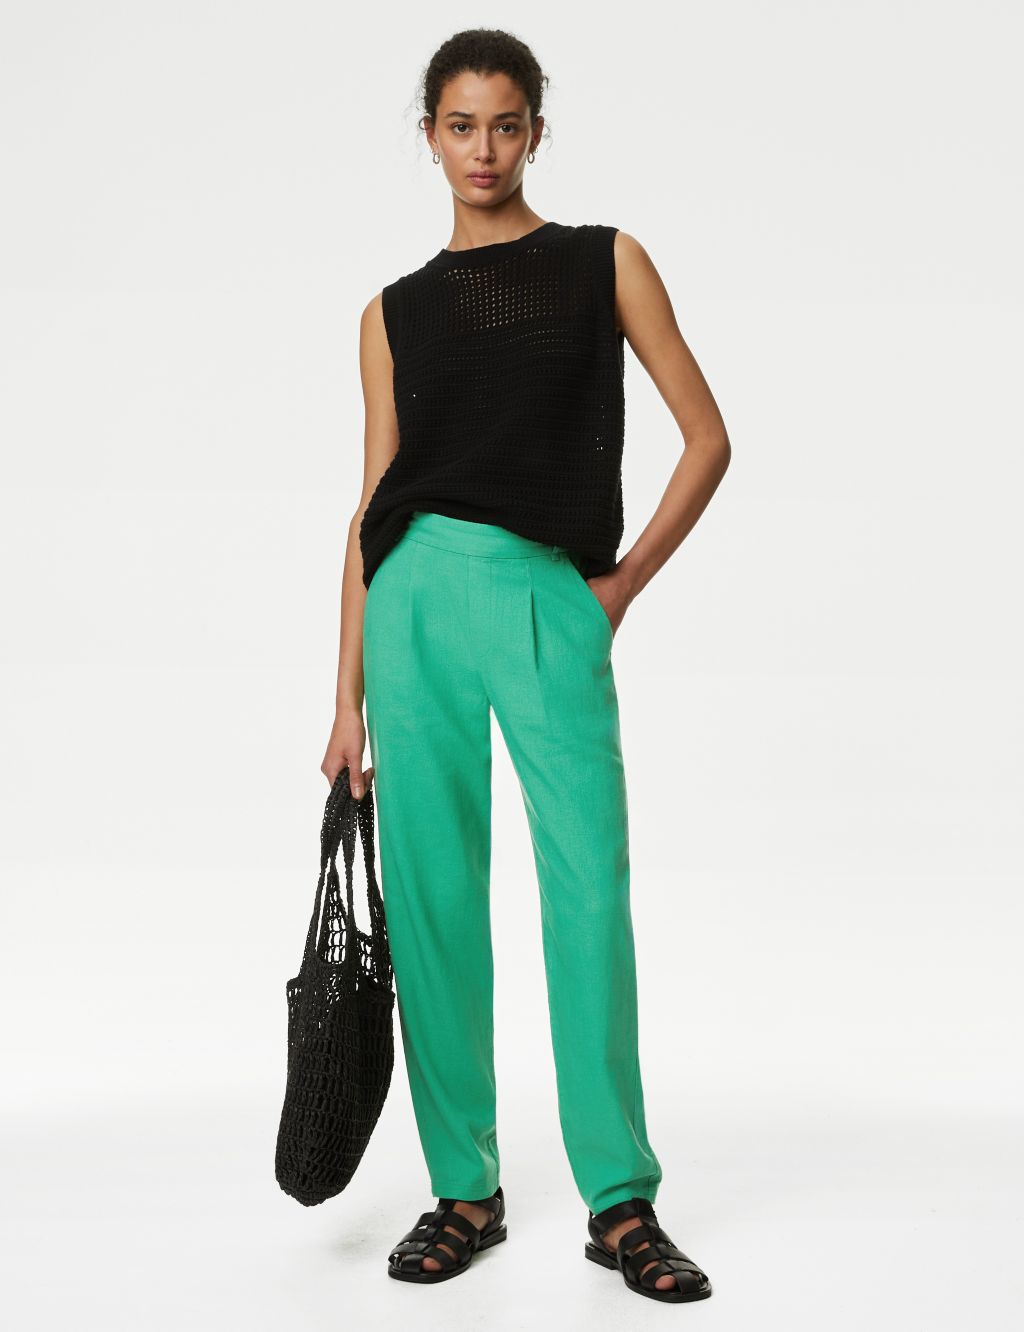 Women's Tapered Trousers | M&S